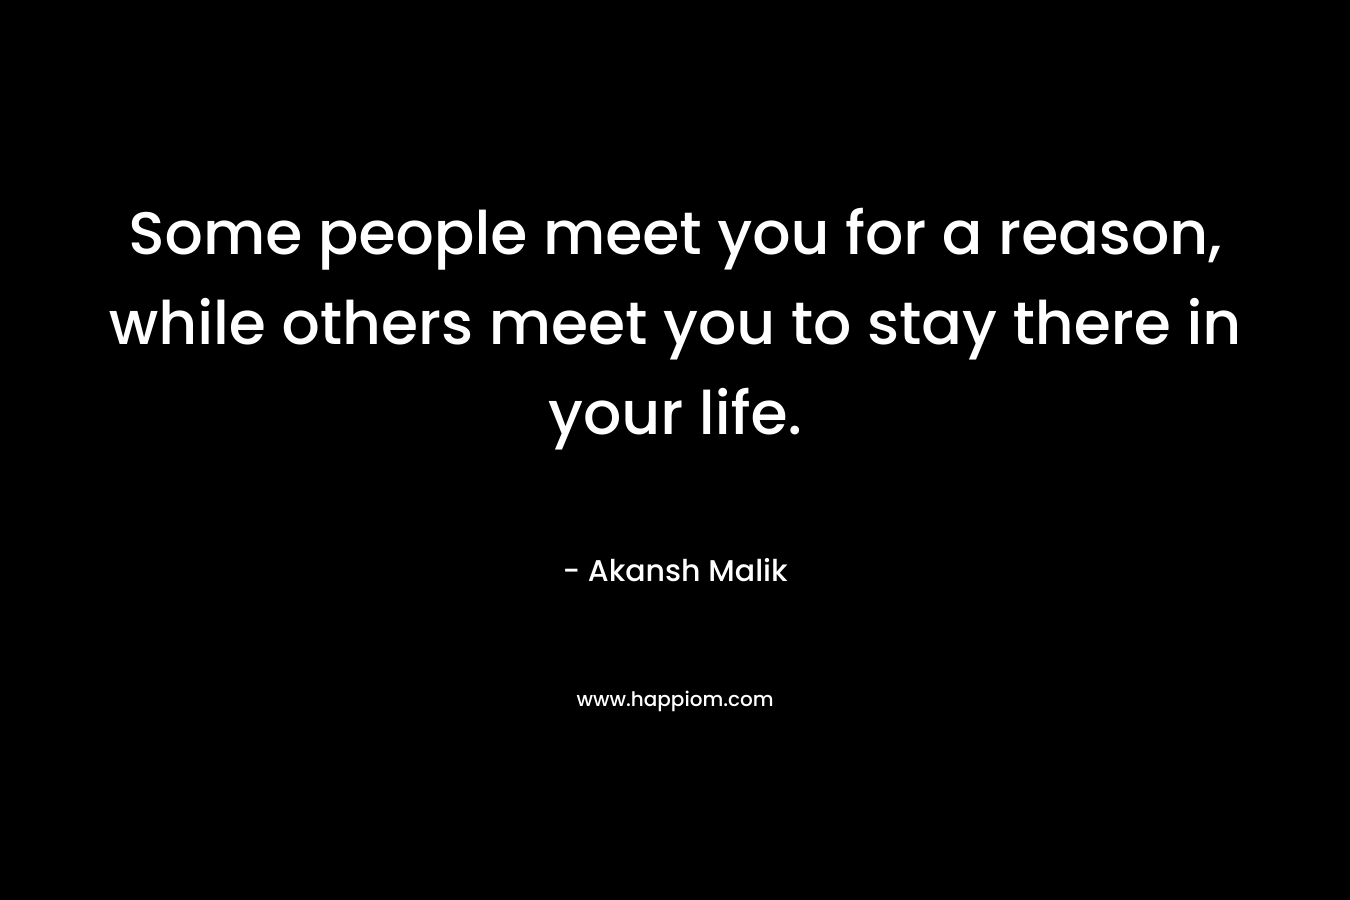 Some people meet you for a reason, while others meet you to stay there in your life.